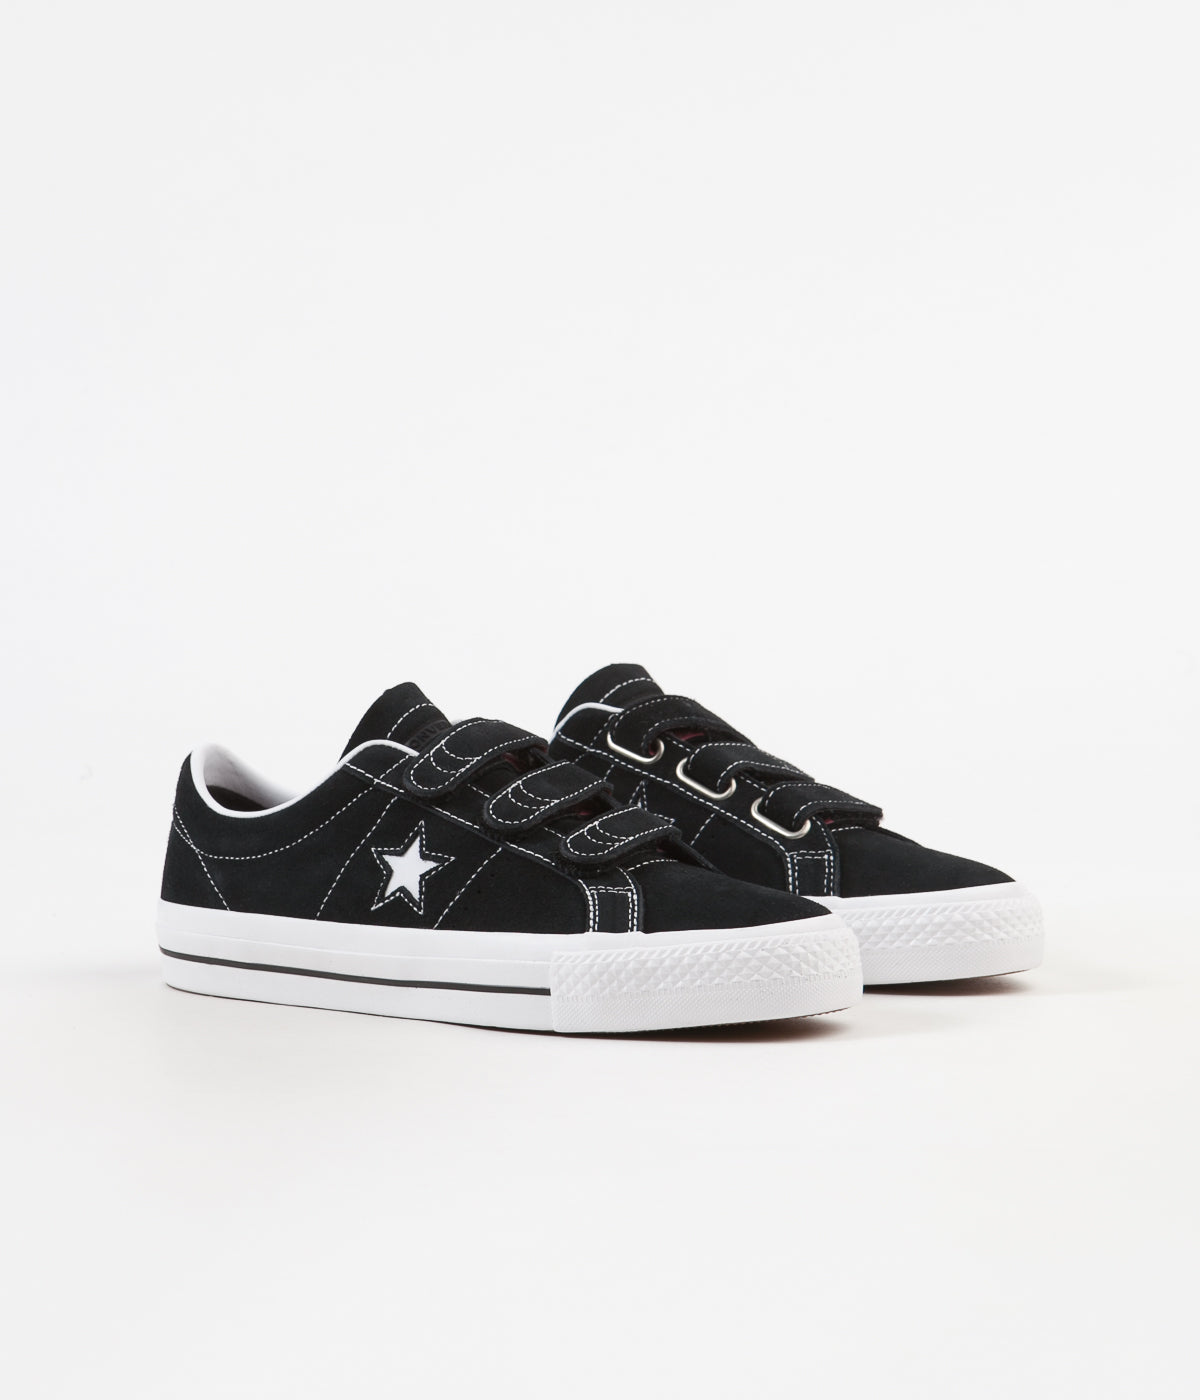 converse one star low profile ox m